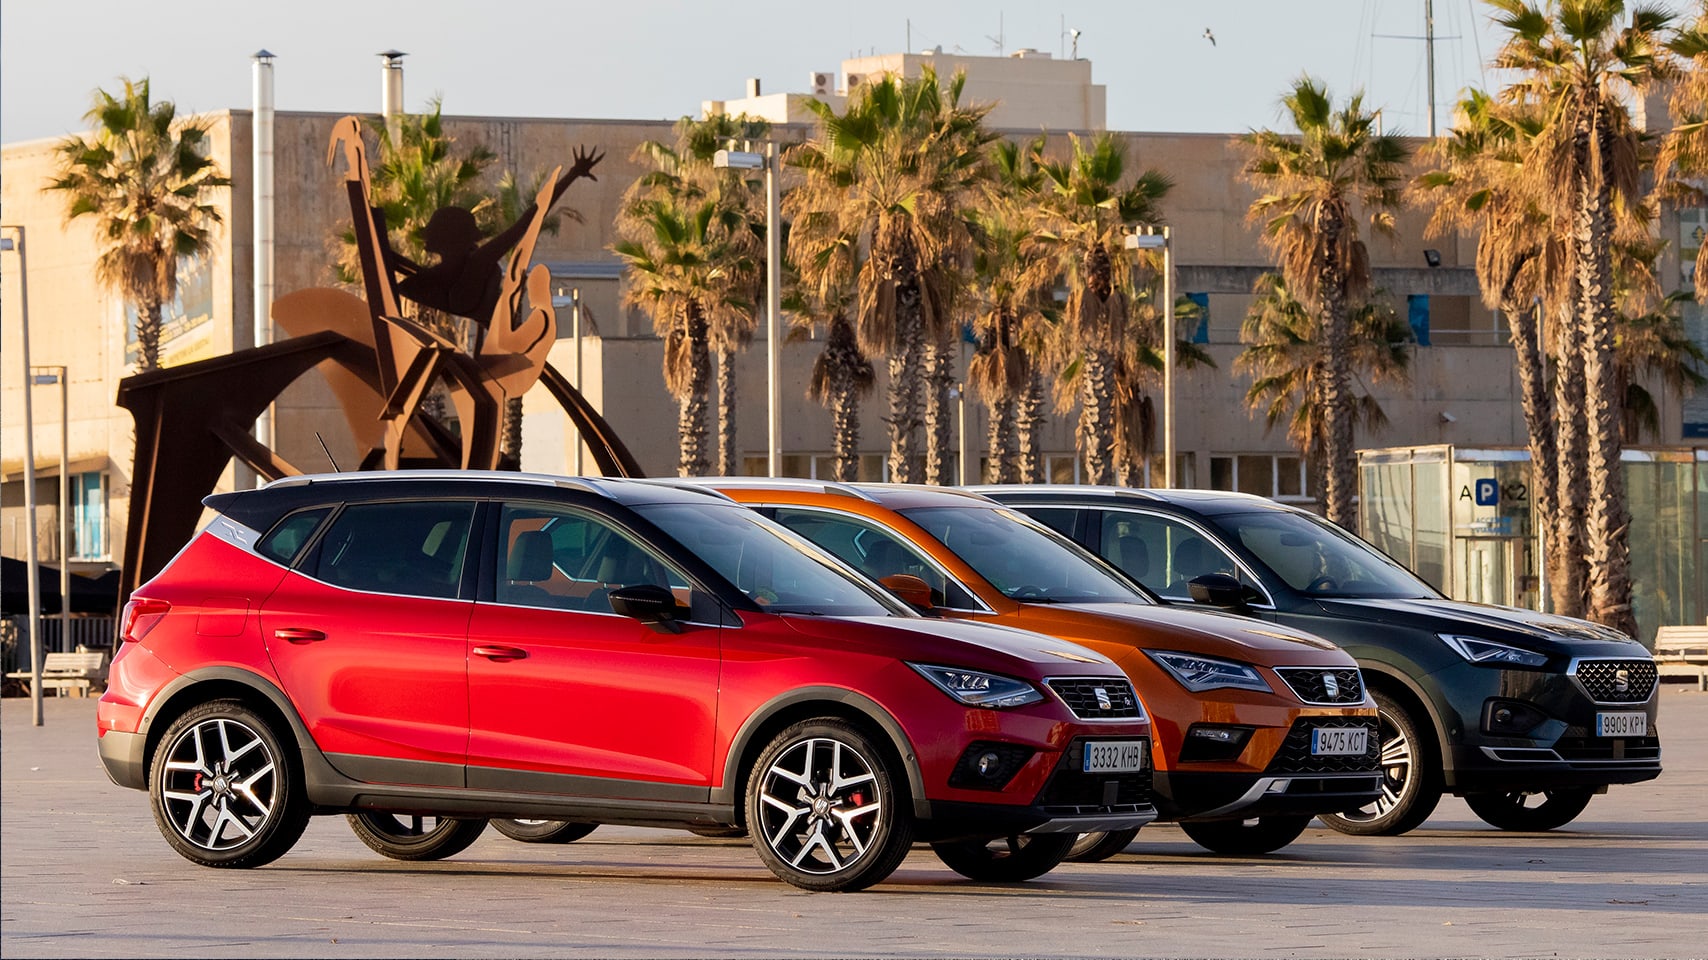 SEAT Arona, Ateca and Tarraco parked in the street